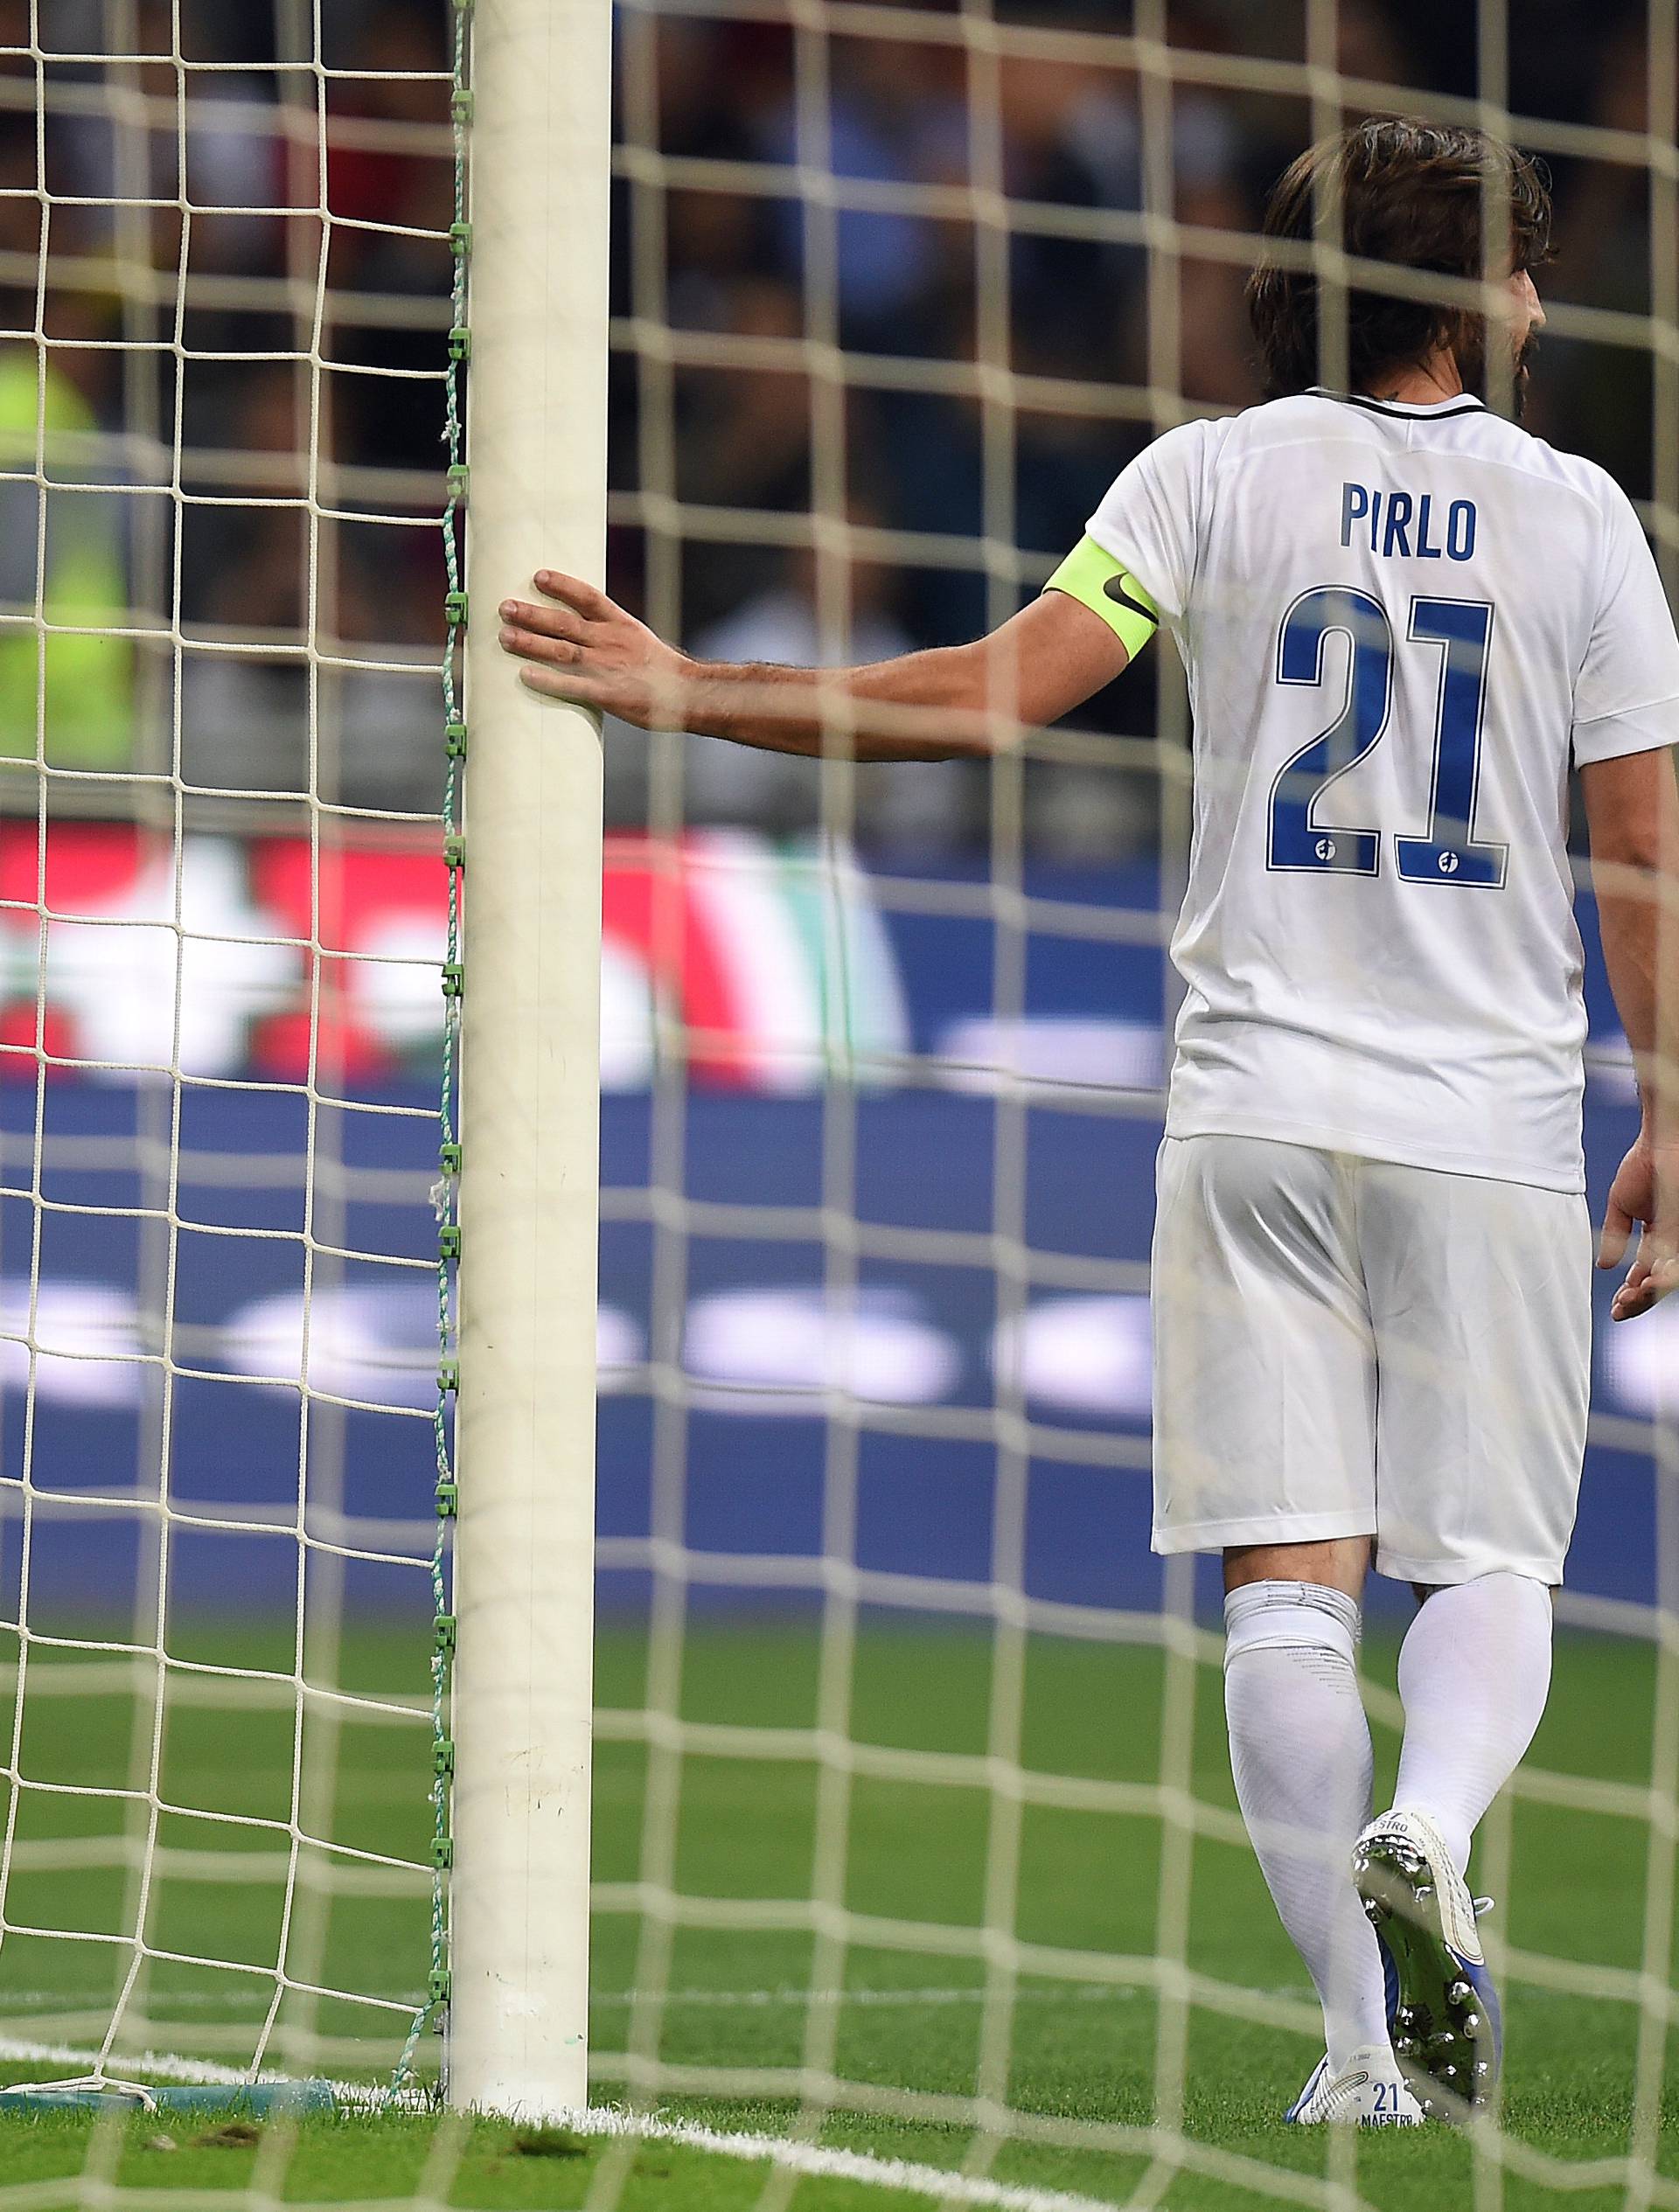 Former Italian soccer player Andrea Pirlo looks on during his farewell soccer match at the San Siro stadium in Milan